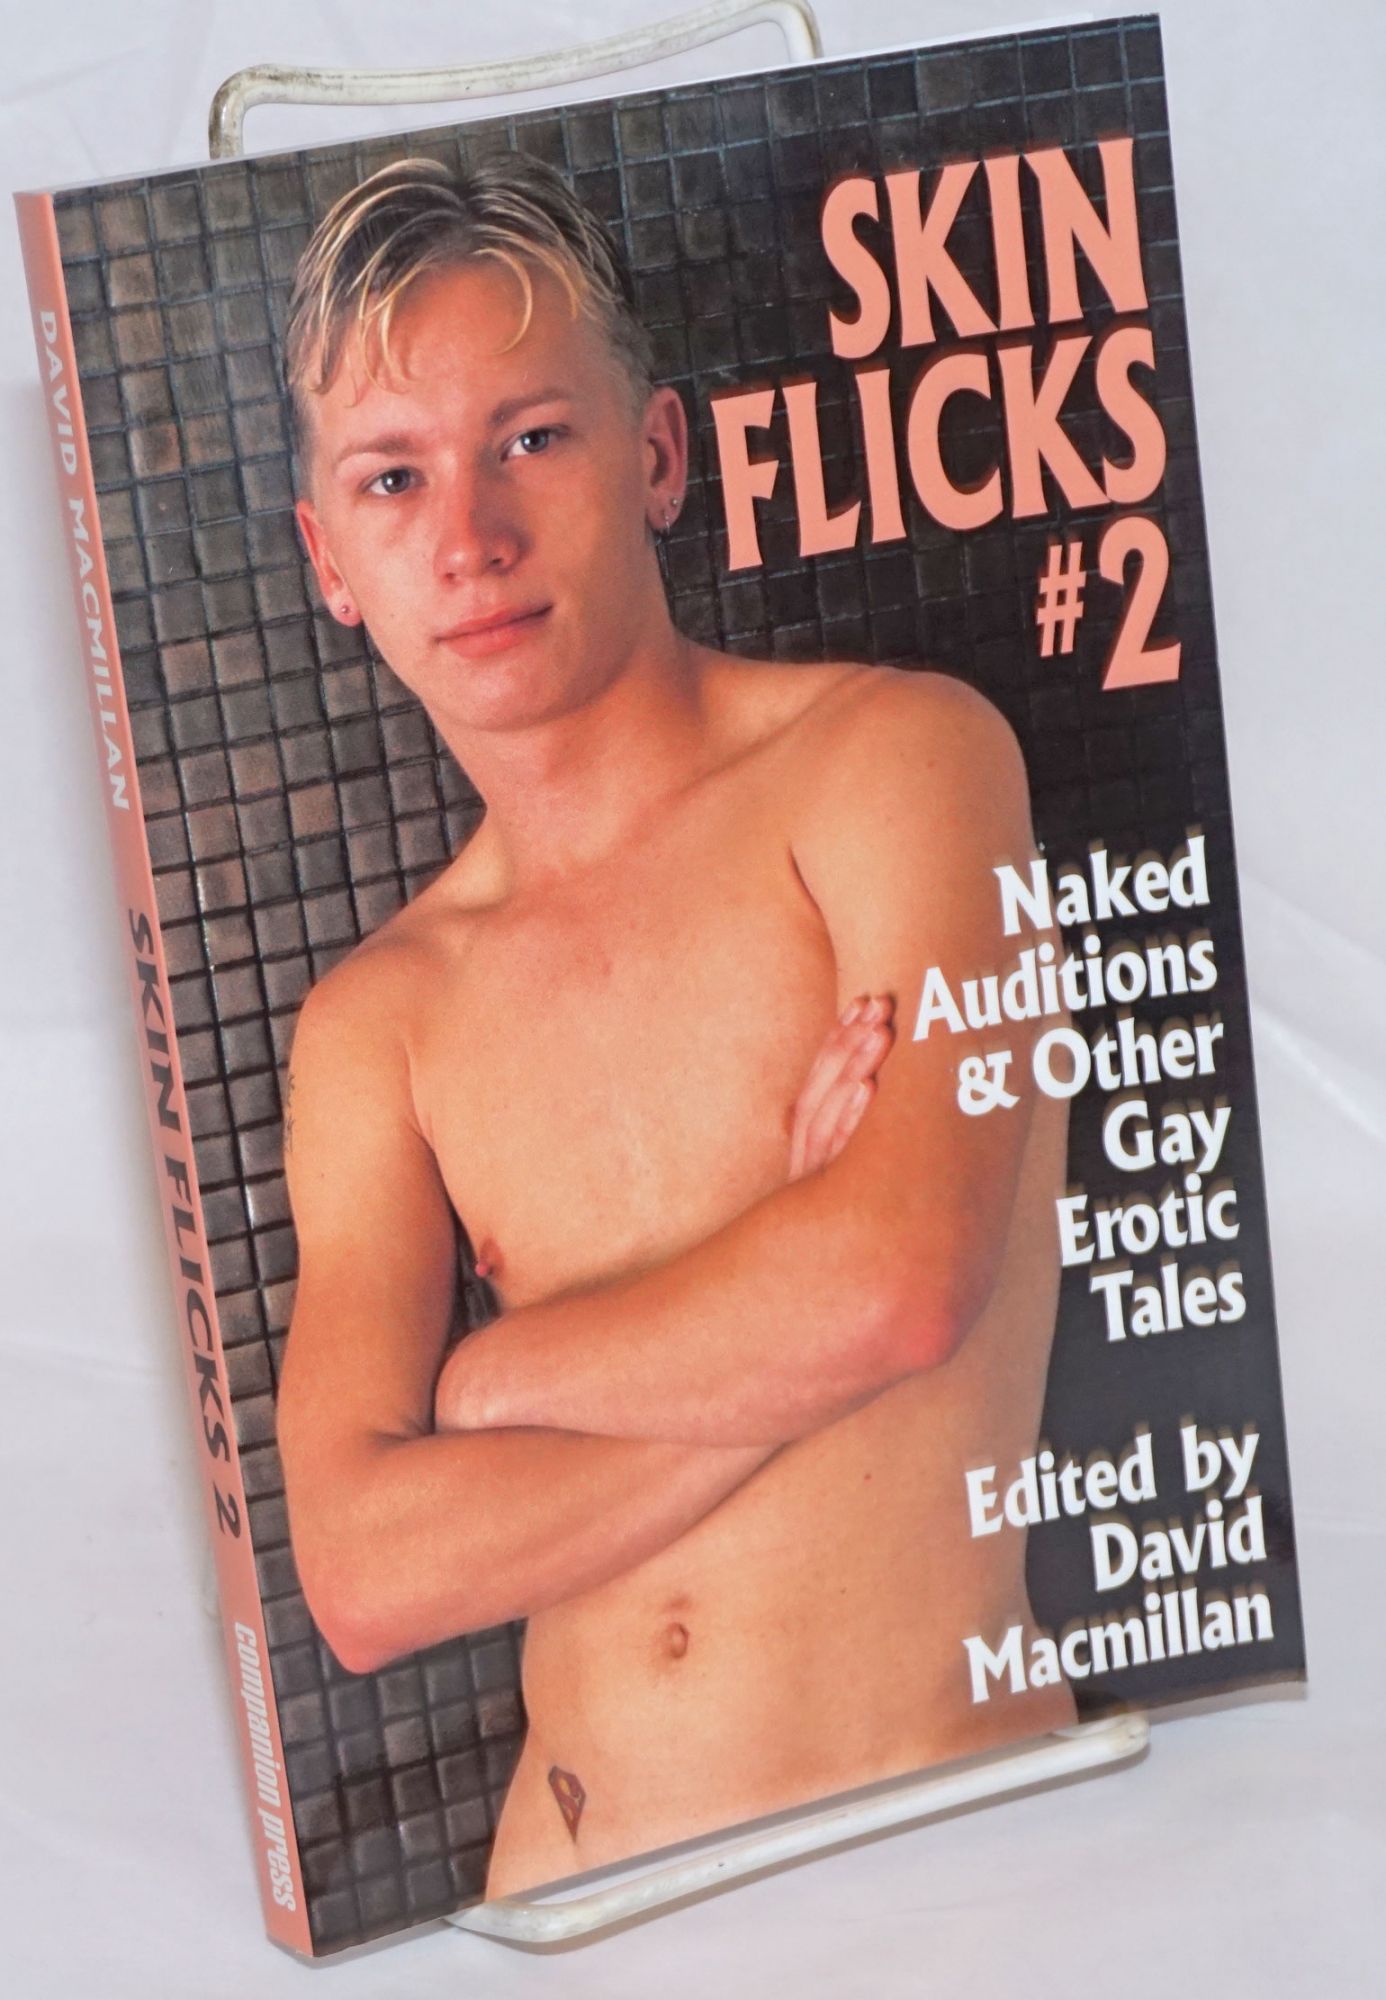 Skin Flicks #2 naked auditions and other gay erotic tales David MacMillan, Barry Alexander Chad Stevens, Simon Sheppard